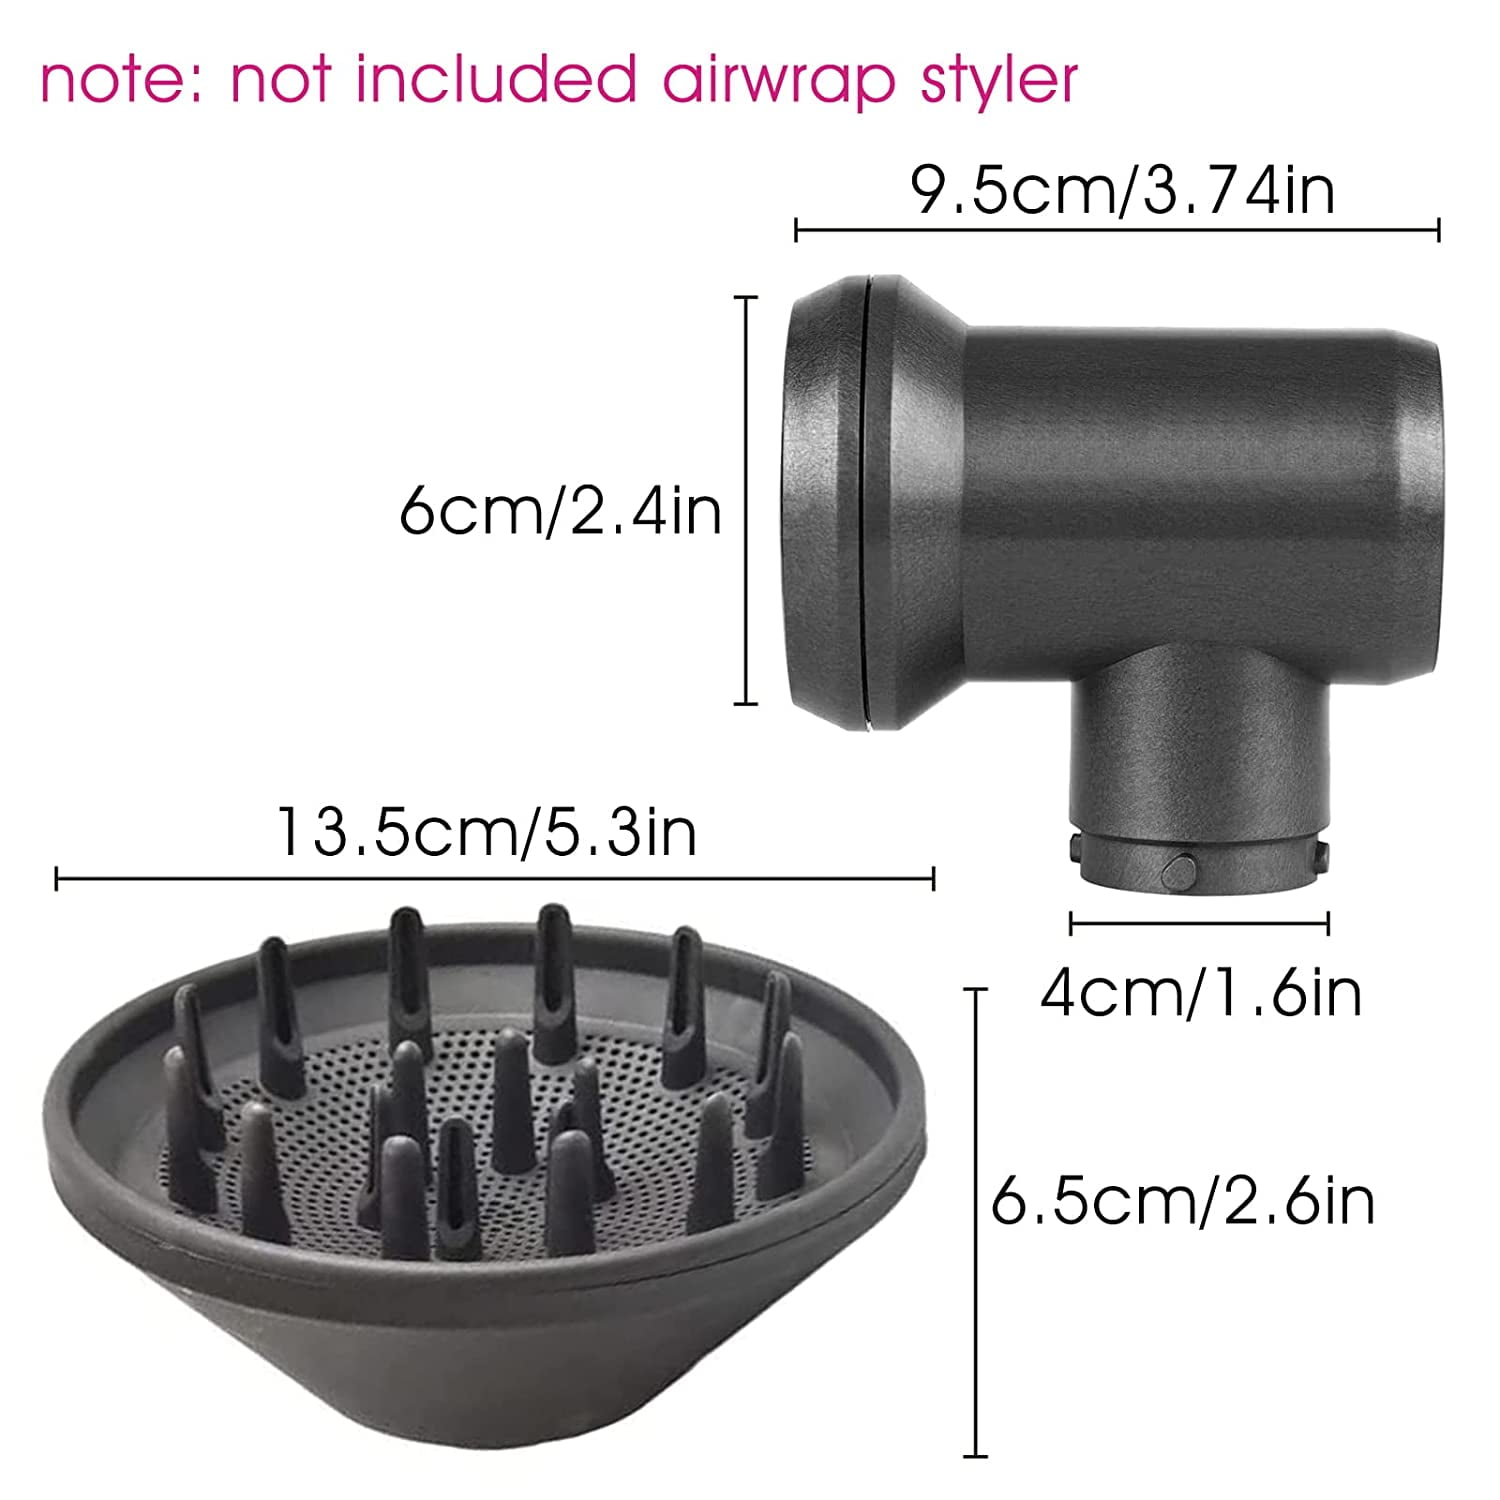 Diffuser and Adaptor for Dyson Airwrap Styler，Diffuser Attachment kit for  Converting Airwrap Styler to Hair Dryer，Grey